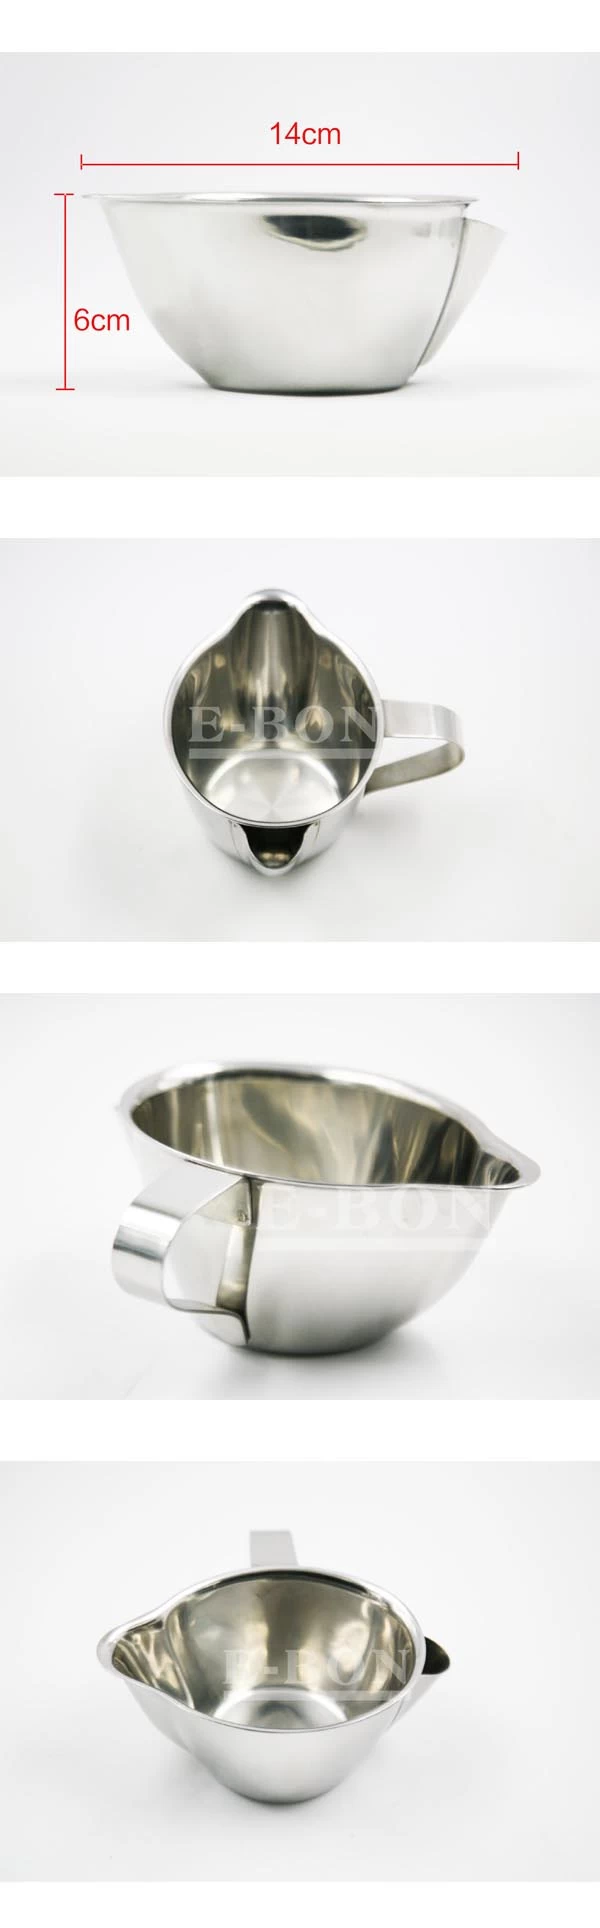 Stainless steel sauce boat 